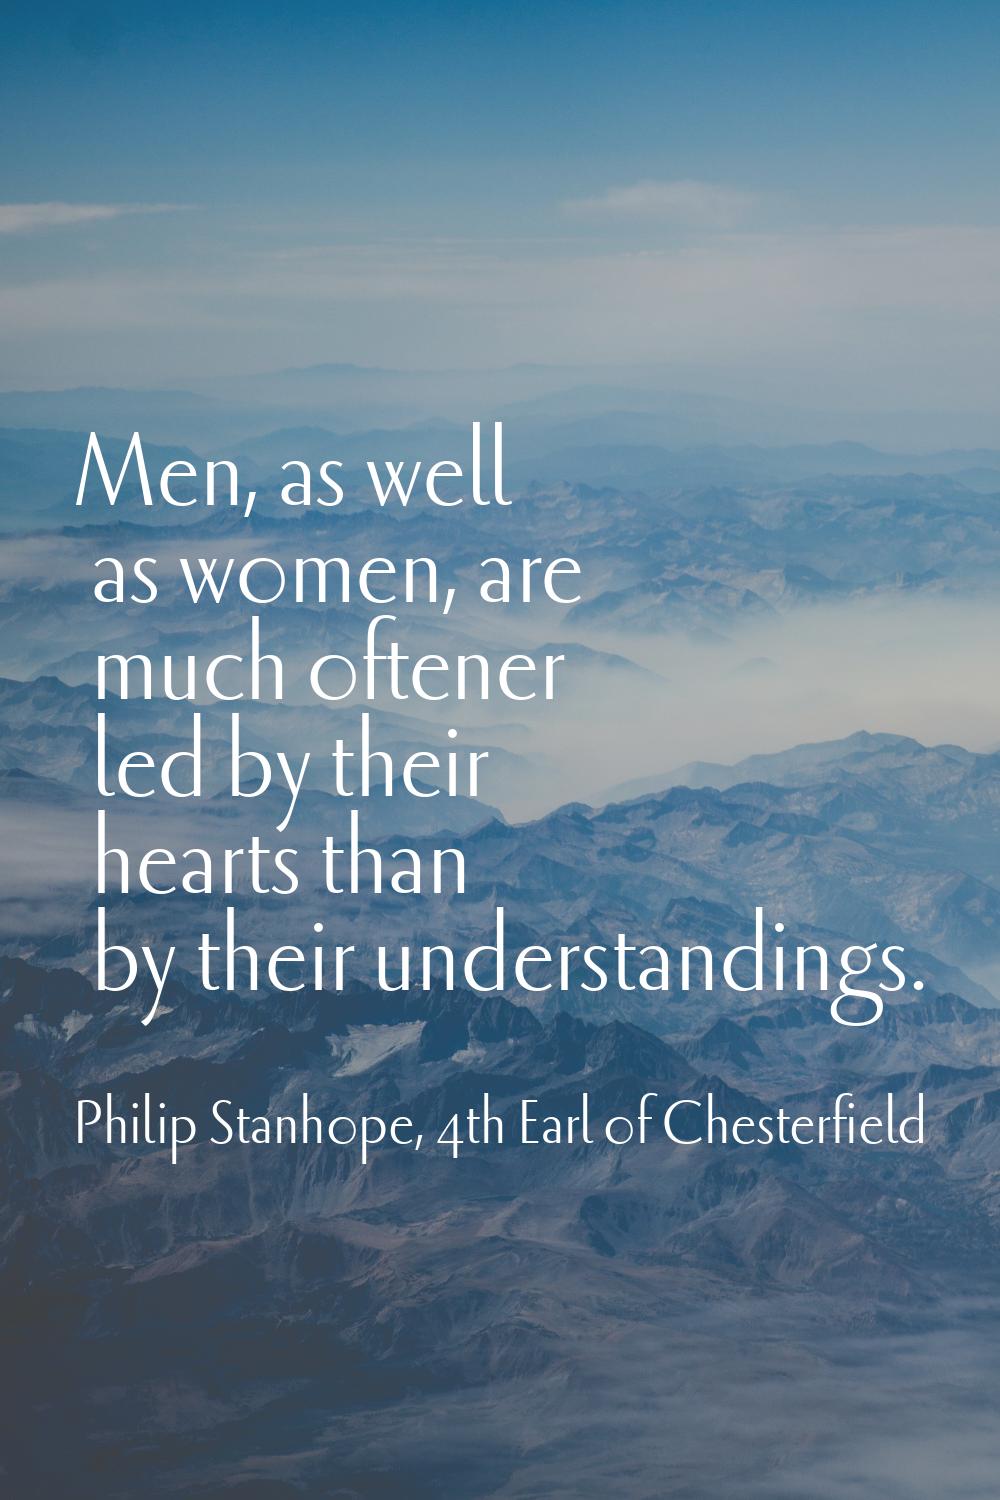 Men, as well as women, are much oftener led by their hearts than by their understandings.